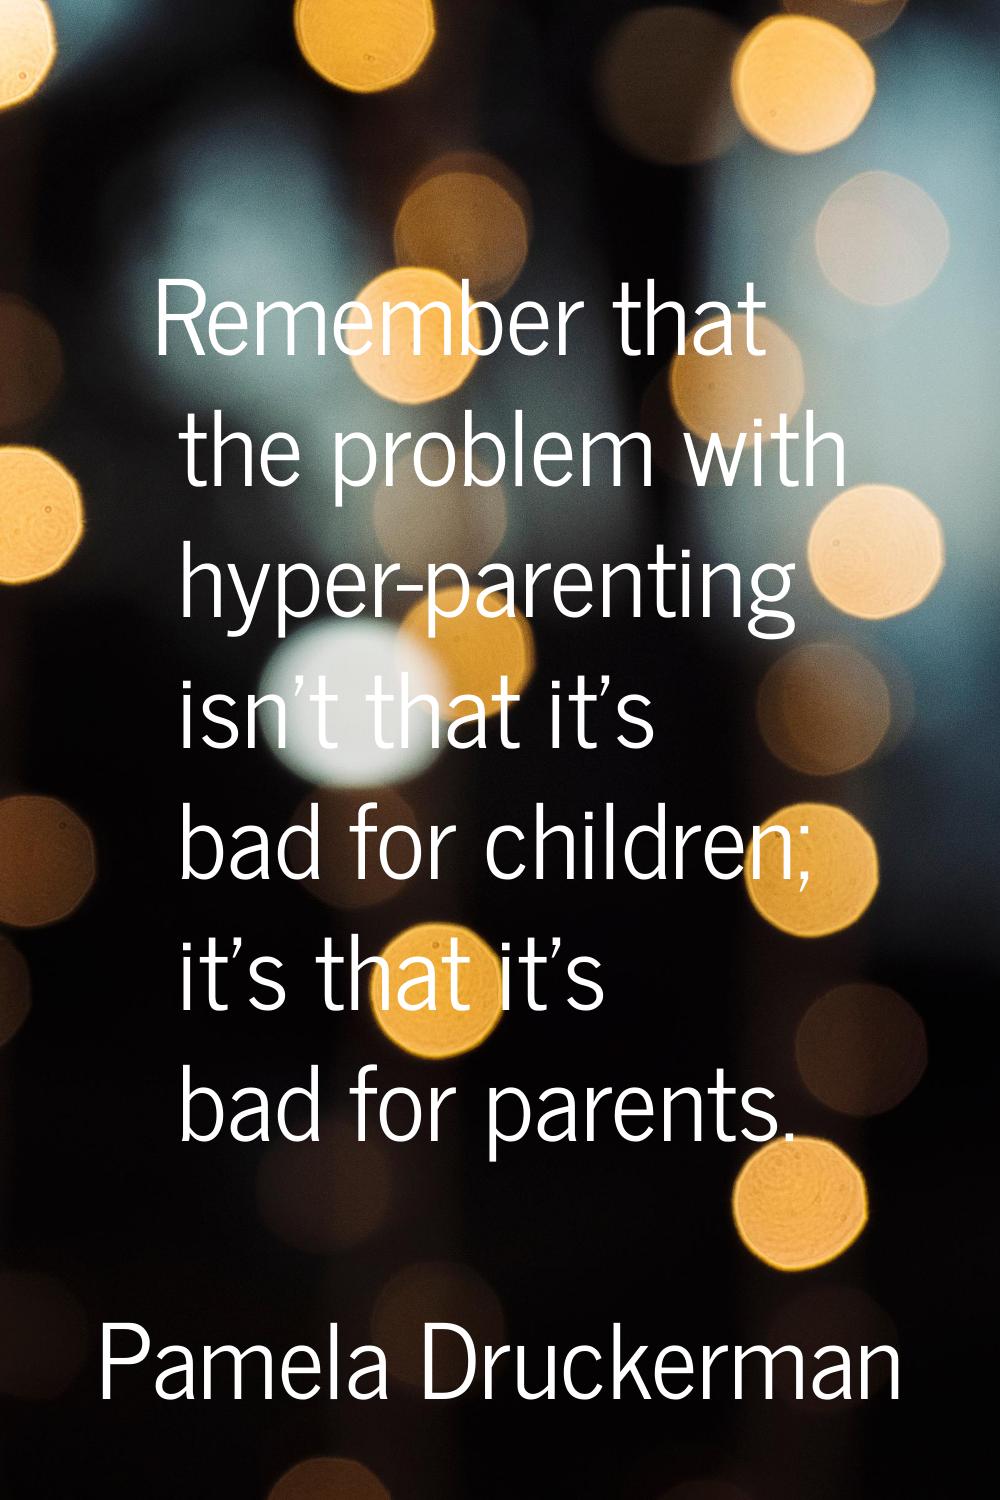 Remember that the problem with hyper-parenting isn't that it's bad for children; it's that it's bad